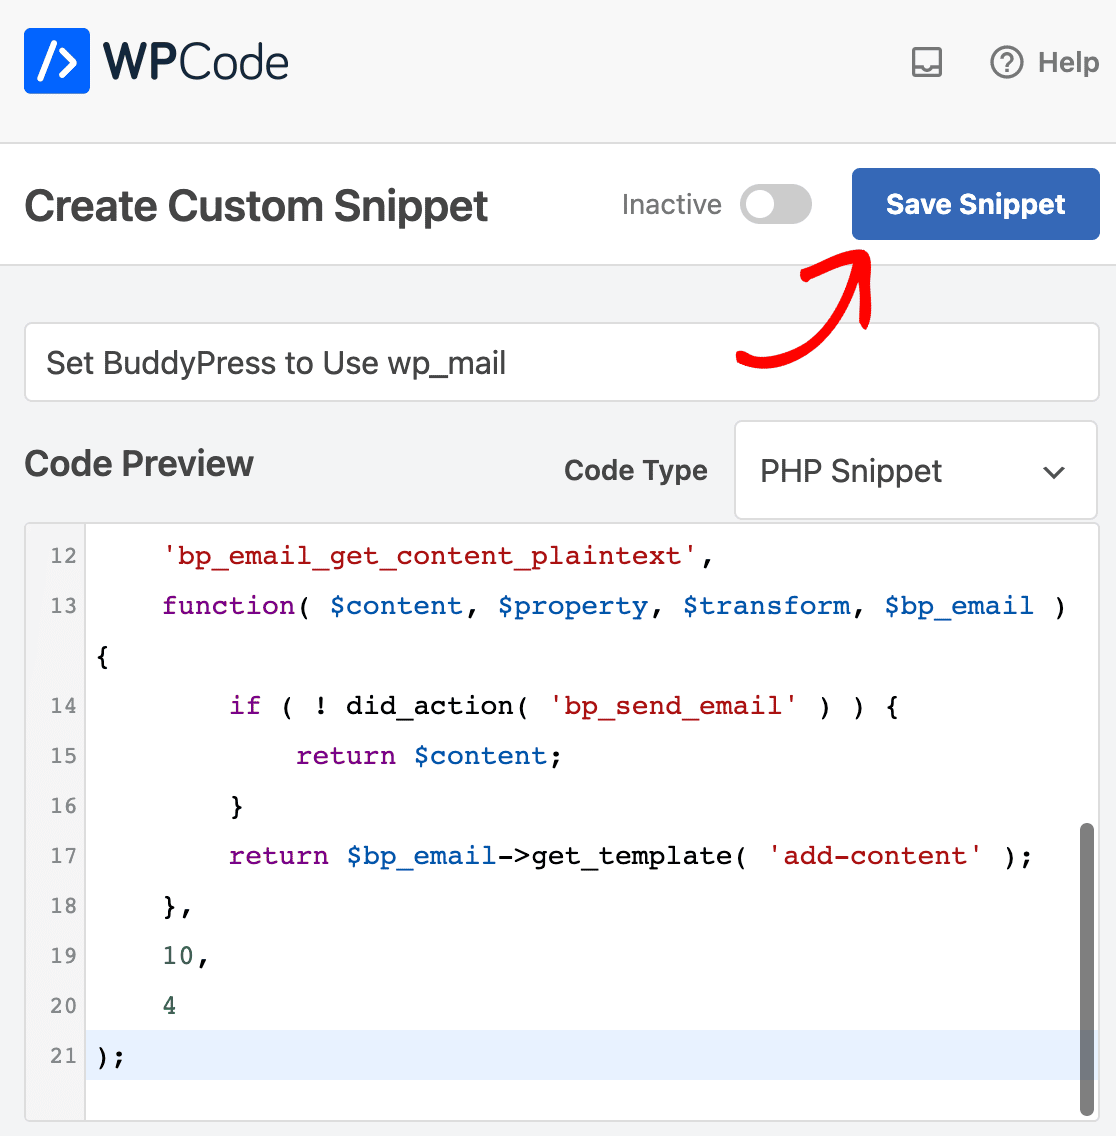 Saving a new snippet in WPCode